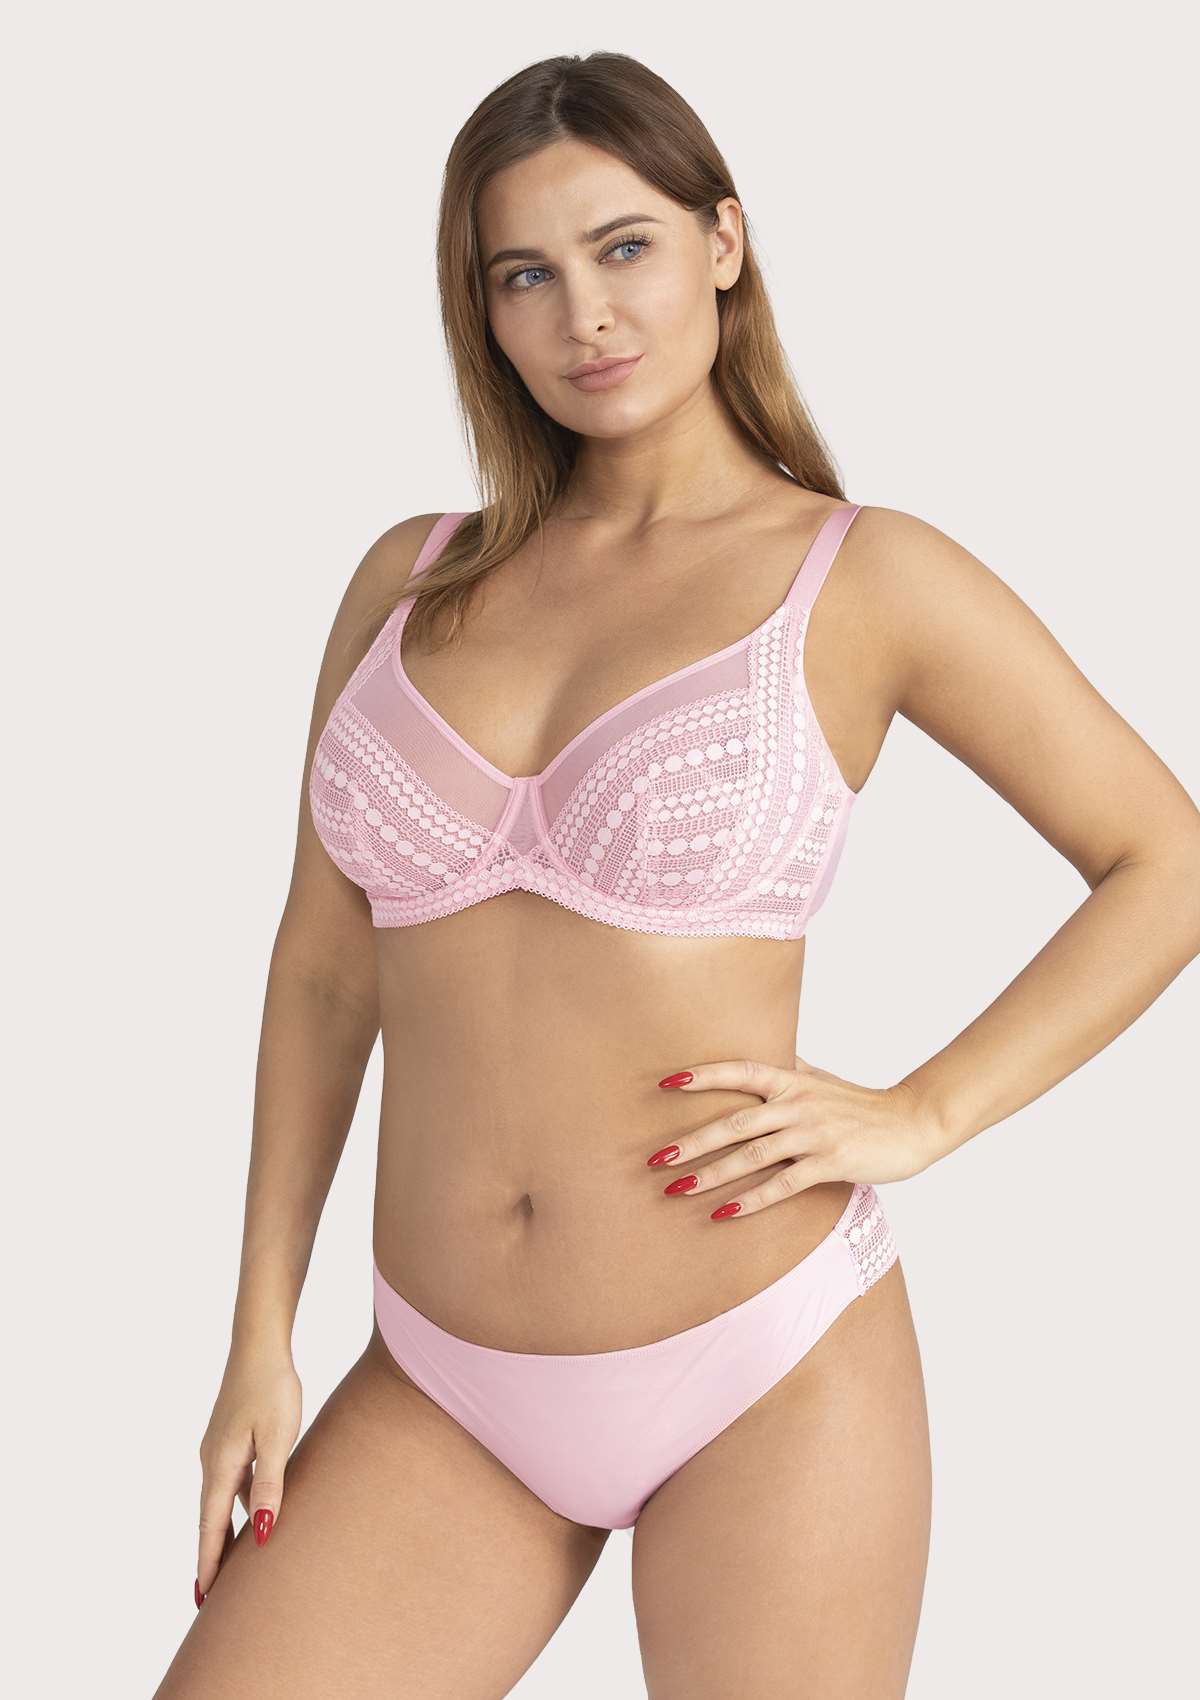 HSIA Heroine Lace Bra And Panties Set: Most Comfortable Supportive Bra - Pink / 34 / D